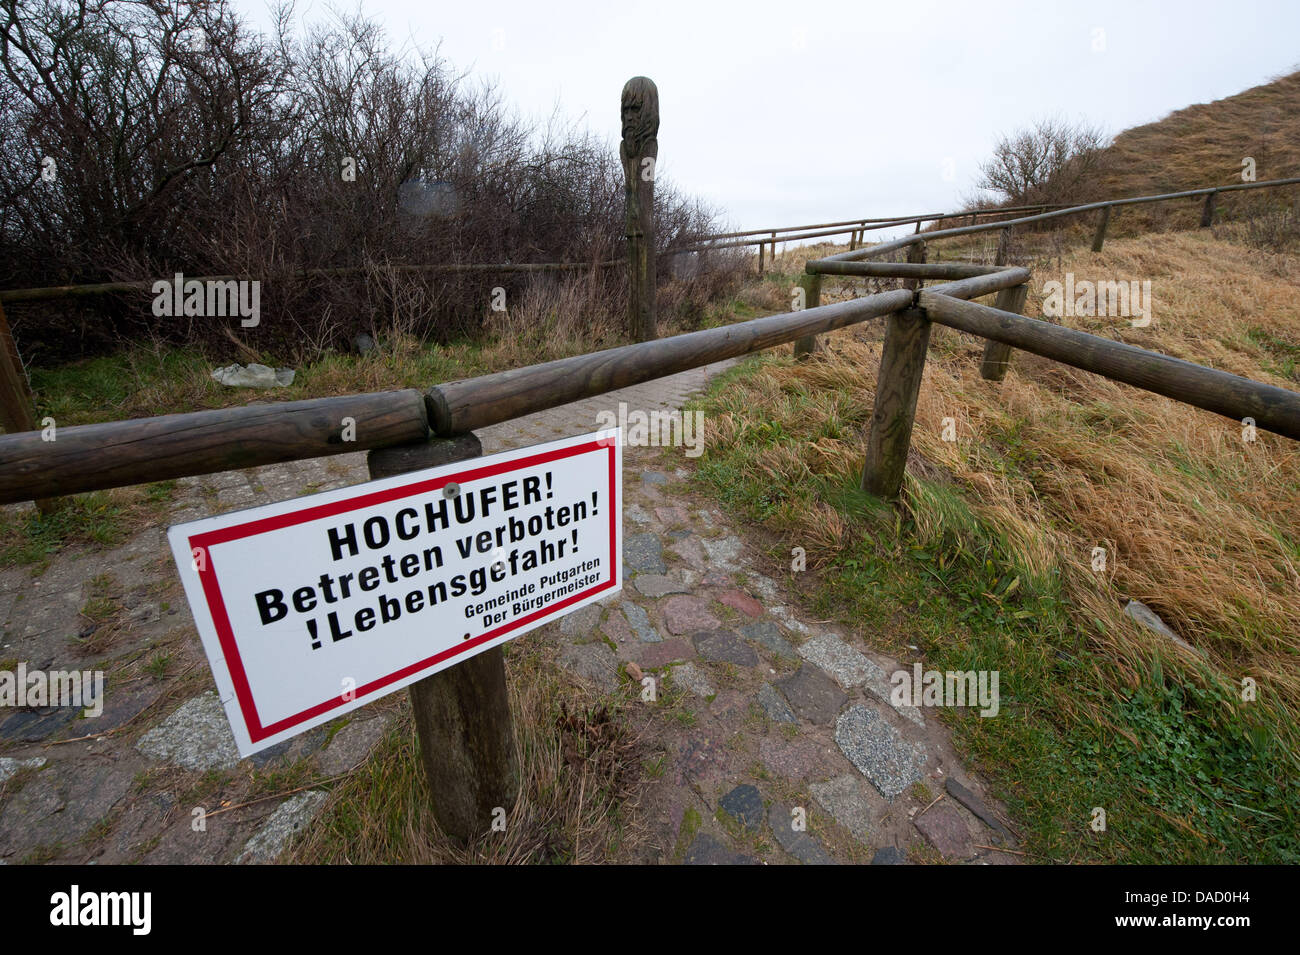 A sign which reads 'HOCHUFER! Betreten verboten! !Lebensgefahr!', Coastal cliffs! Keep off the ground! !Danger to life!, stands on the access pathway to the steep cliff line at Cape Arkona on the island of Ruegen, Putgarten, Germany, 28 December 2011. On Monday afternoon, 26 December 2011, several thousand cubic metres of clay and chalkstone crashed into the sea taking by surprise  Stock Photo